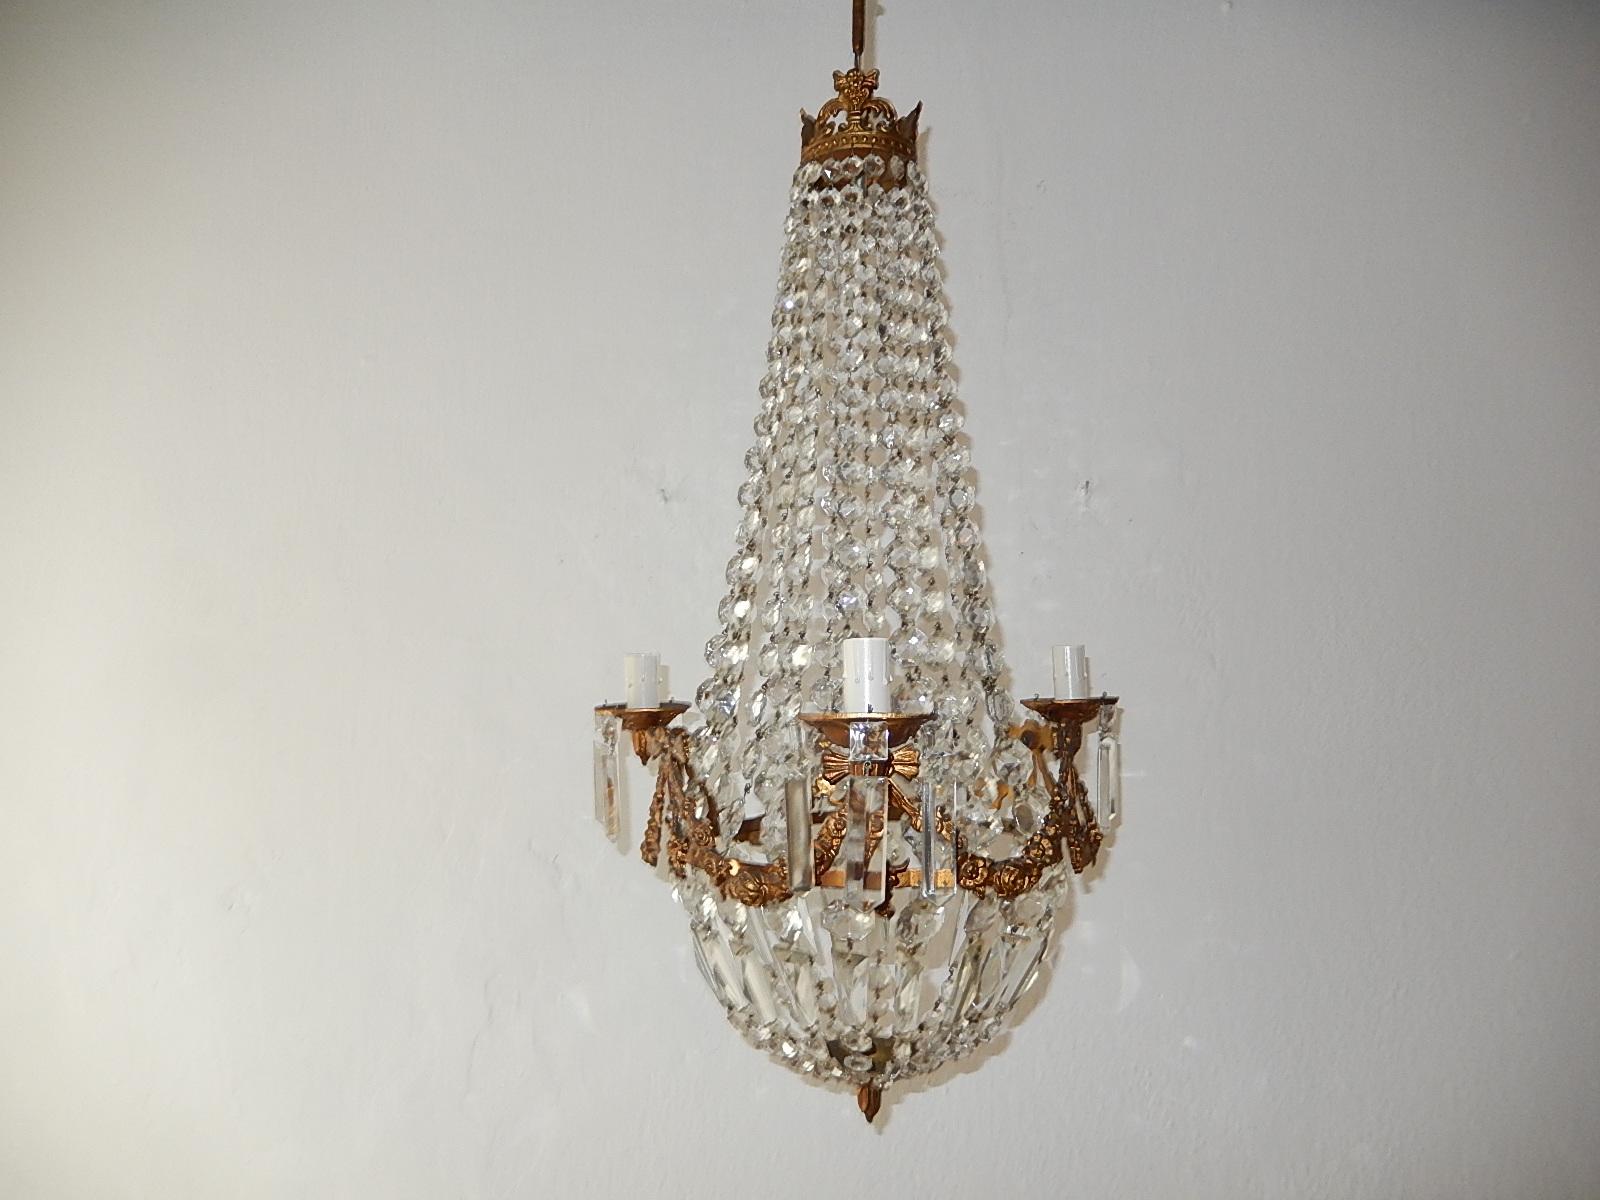 Housing three-lights. Rewired and ready to hang. Bronze flowers and bows detail. Crystal prisms. Adding original chain and canopy. Re-wired and ready to hang. Free priority shipping from Italy.